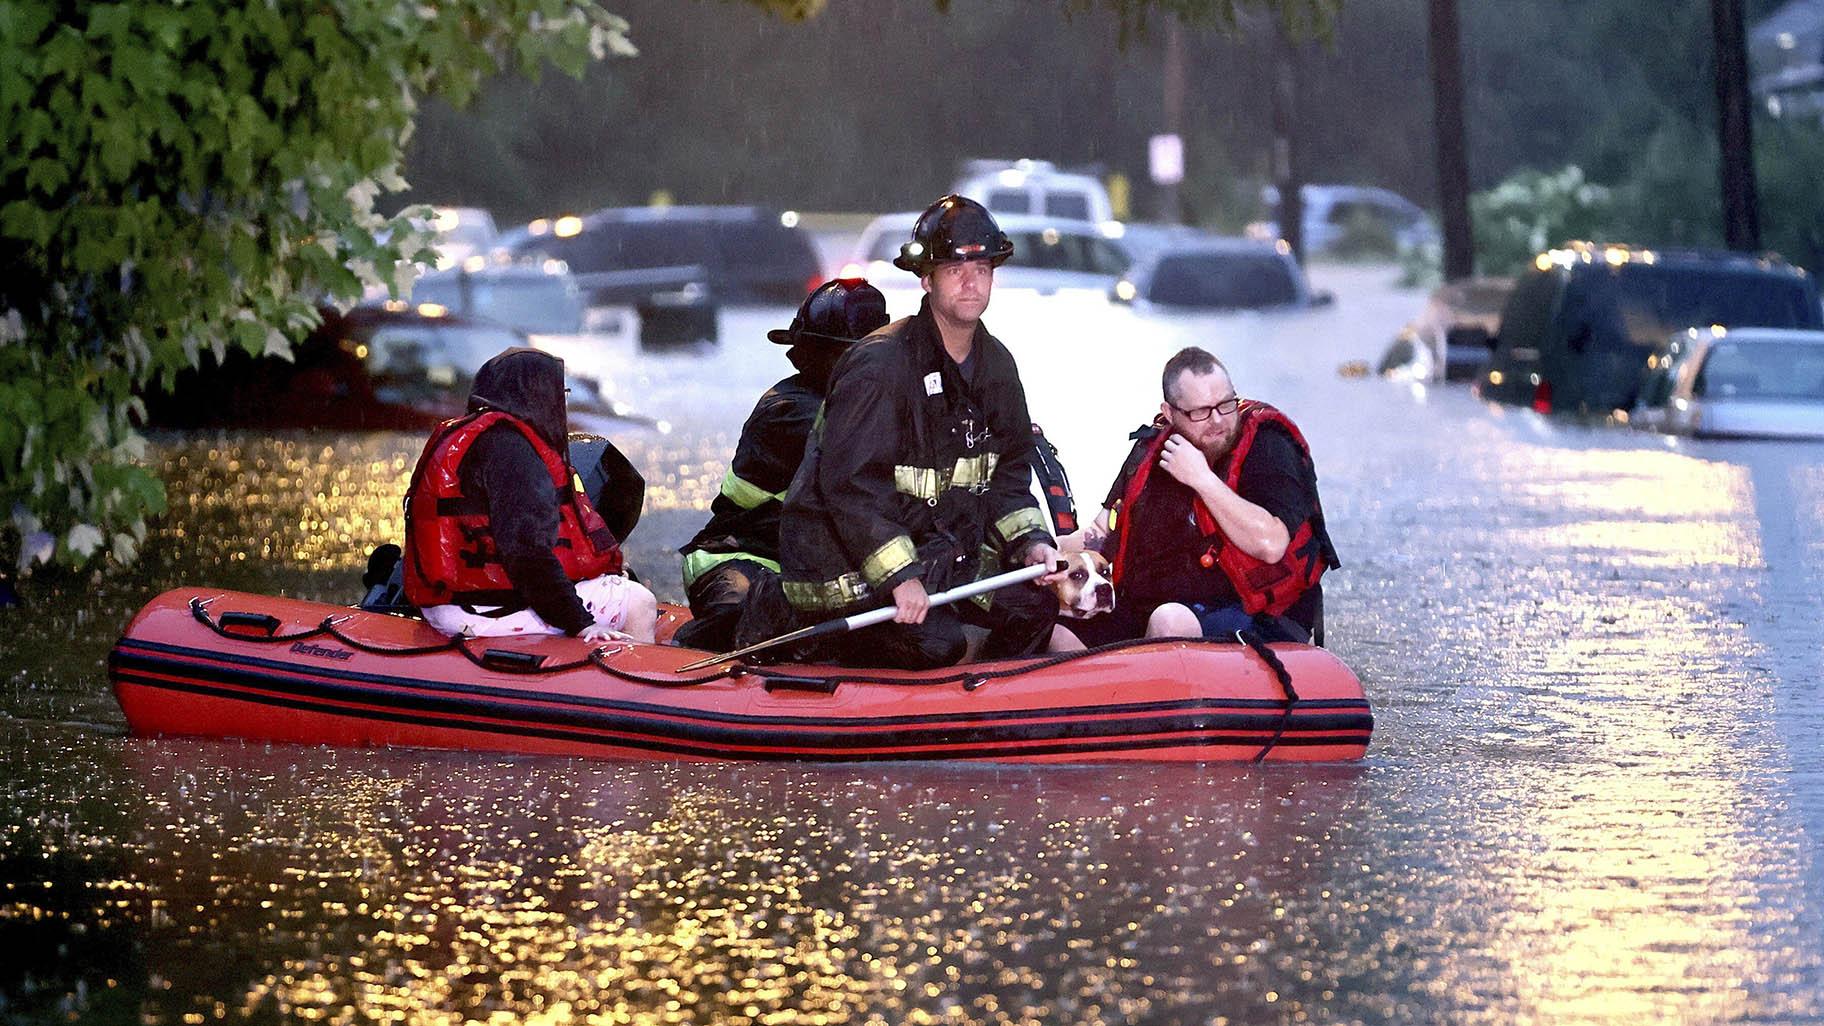 Steven Bertke and his dog Roscoe are taken to dry land by St. Louis firefighters who used a boat to rescue people from their flooded homes on Hermitage Avenue in St. Louis on Tuesday, July 26, 2022. (David Carson / St. Louis Post-Dispatch via AP)